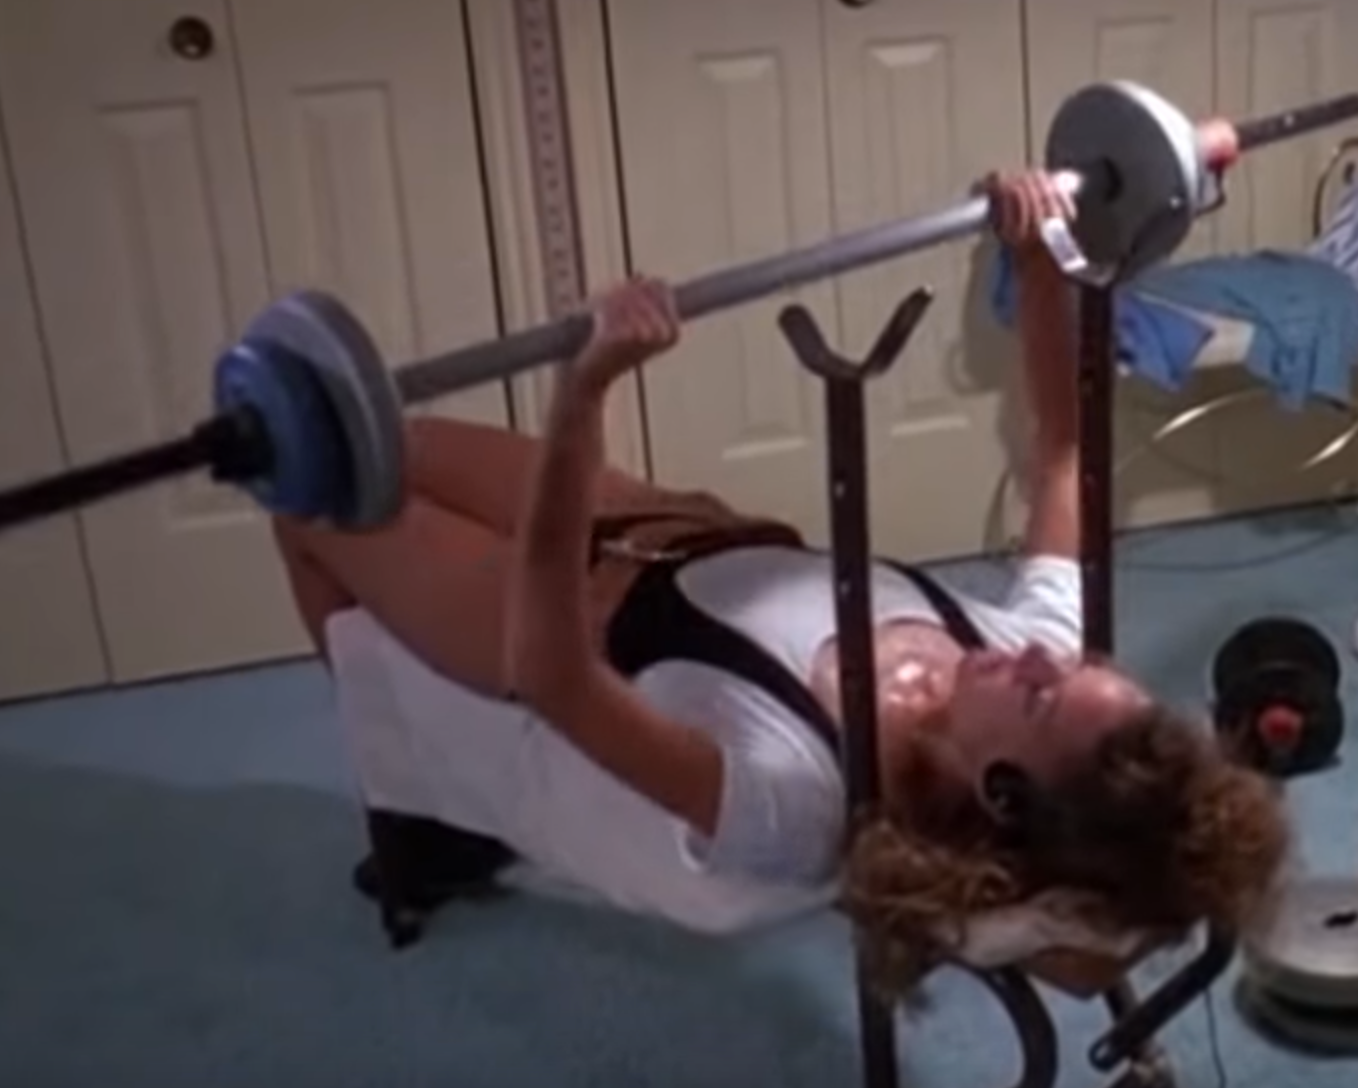 Holly pumping iron in Troll 2